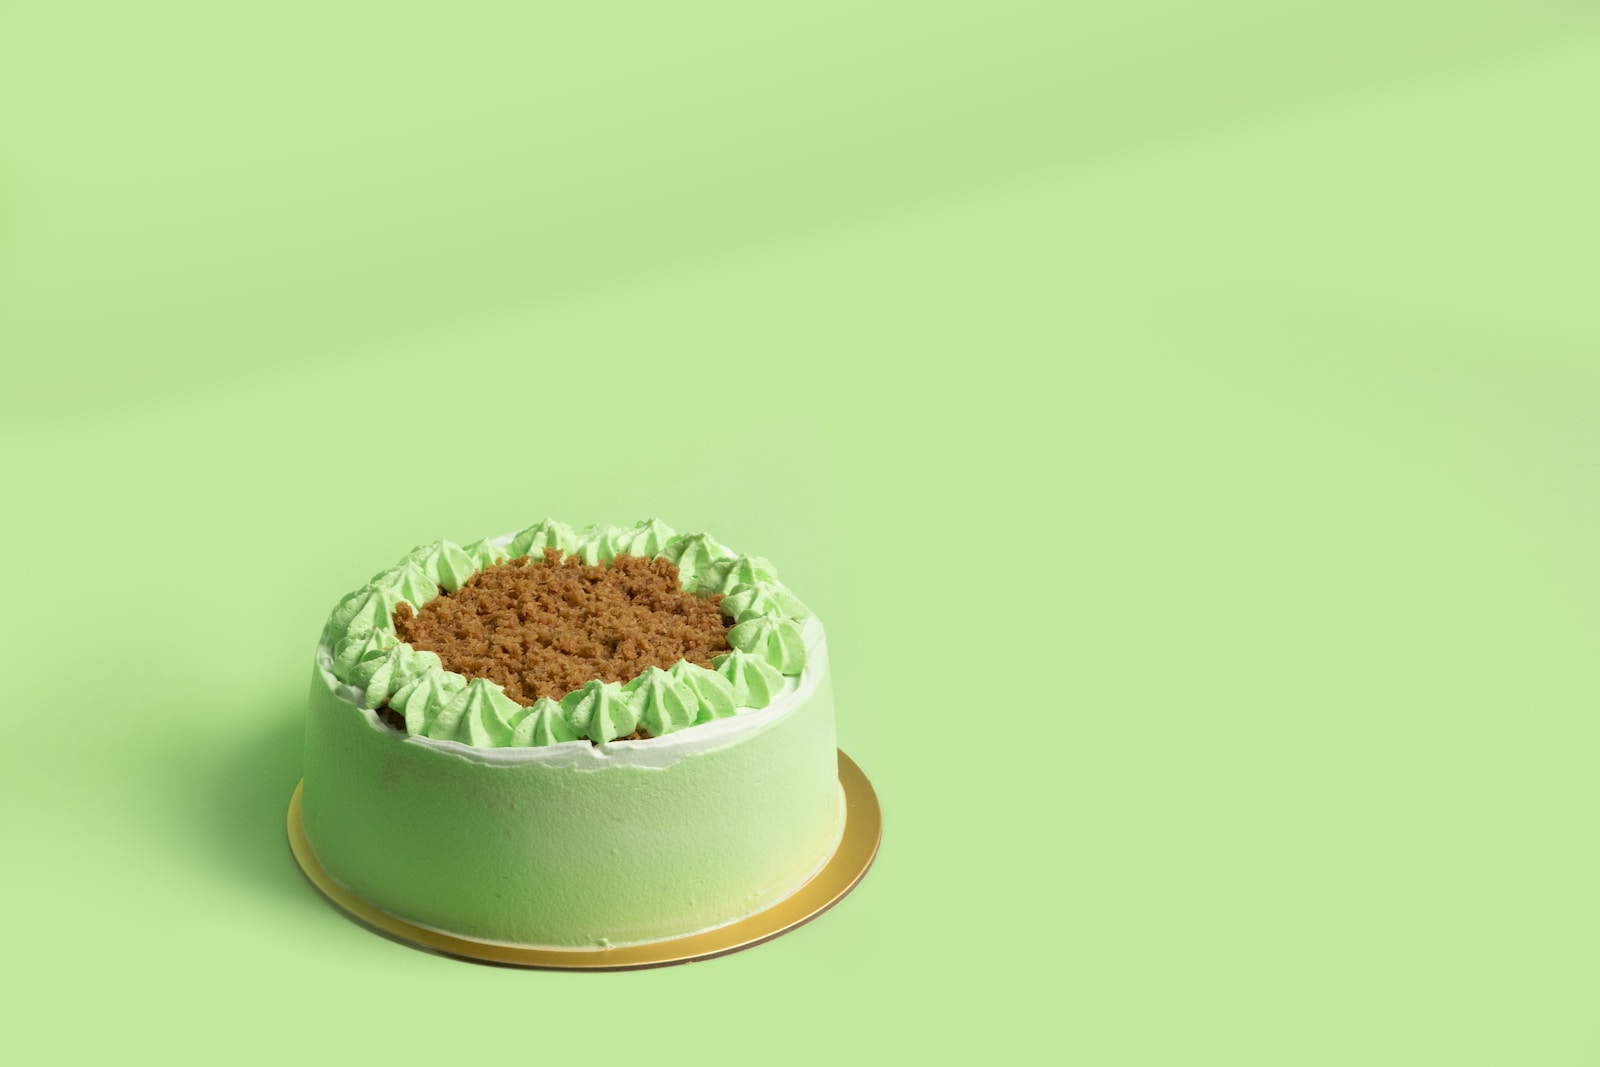 green and white cake on green round plate